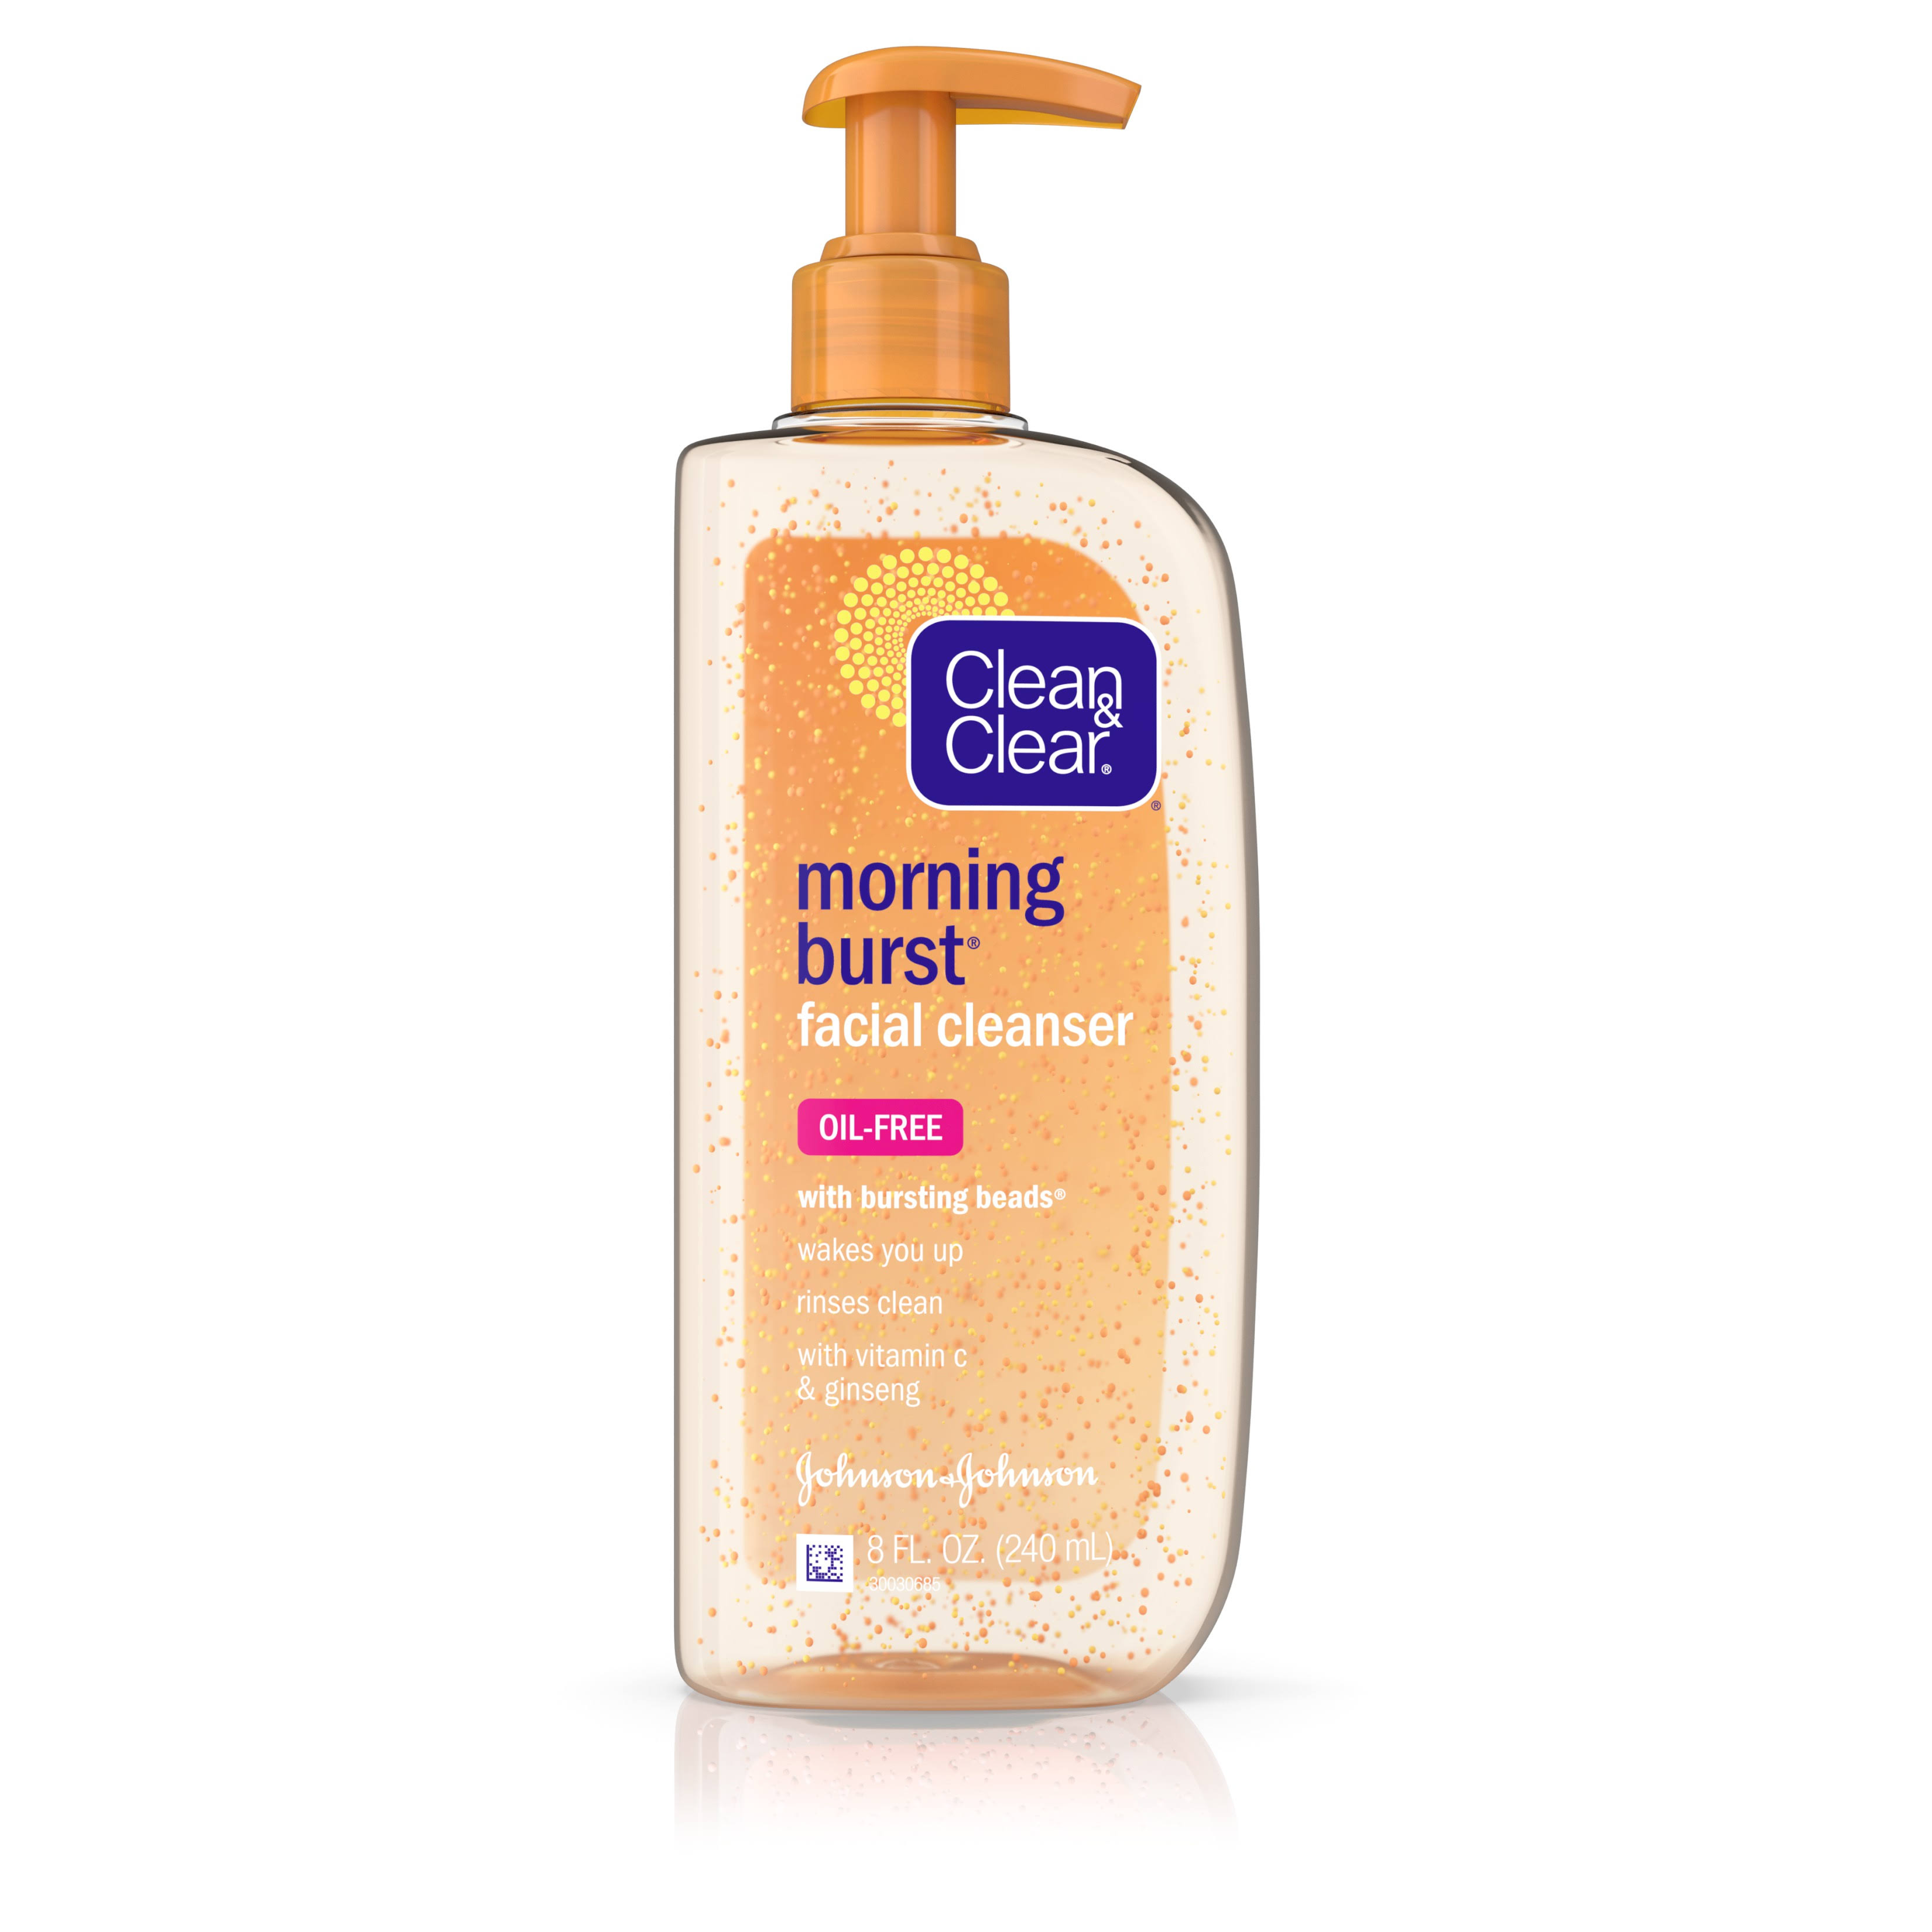 Clean and Clear Morning Burst Facial Cleanser - 8oz